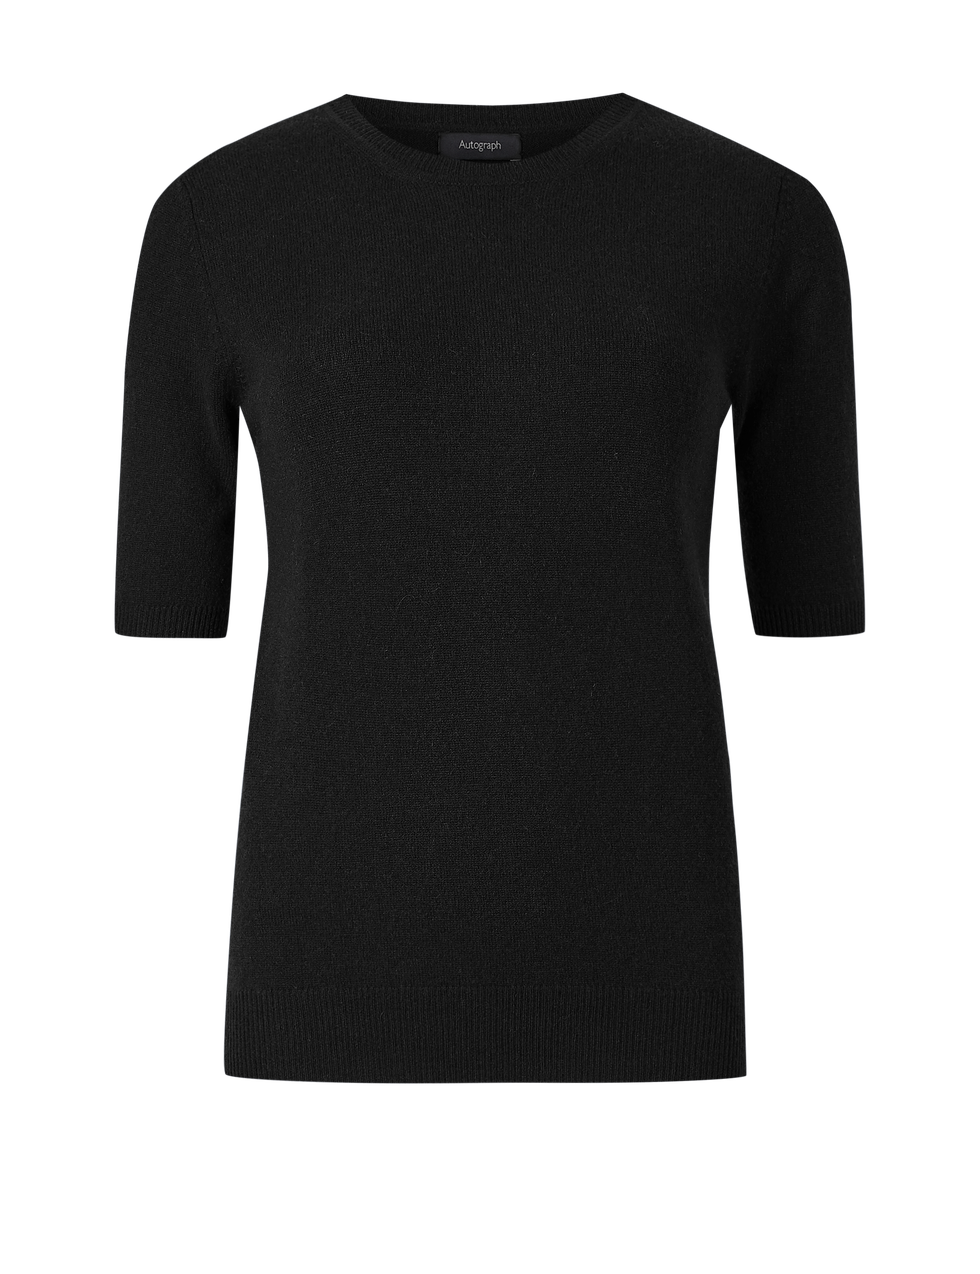 Clothing, Black, T-shirt, Sleeve, Outerwear, Jersey, Neck, Top, Long-sleeved t-shirt, Sweater, 